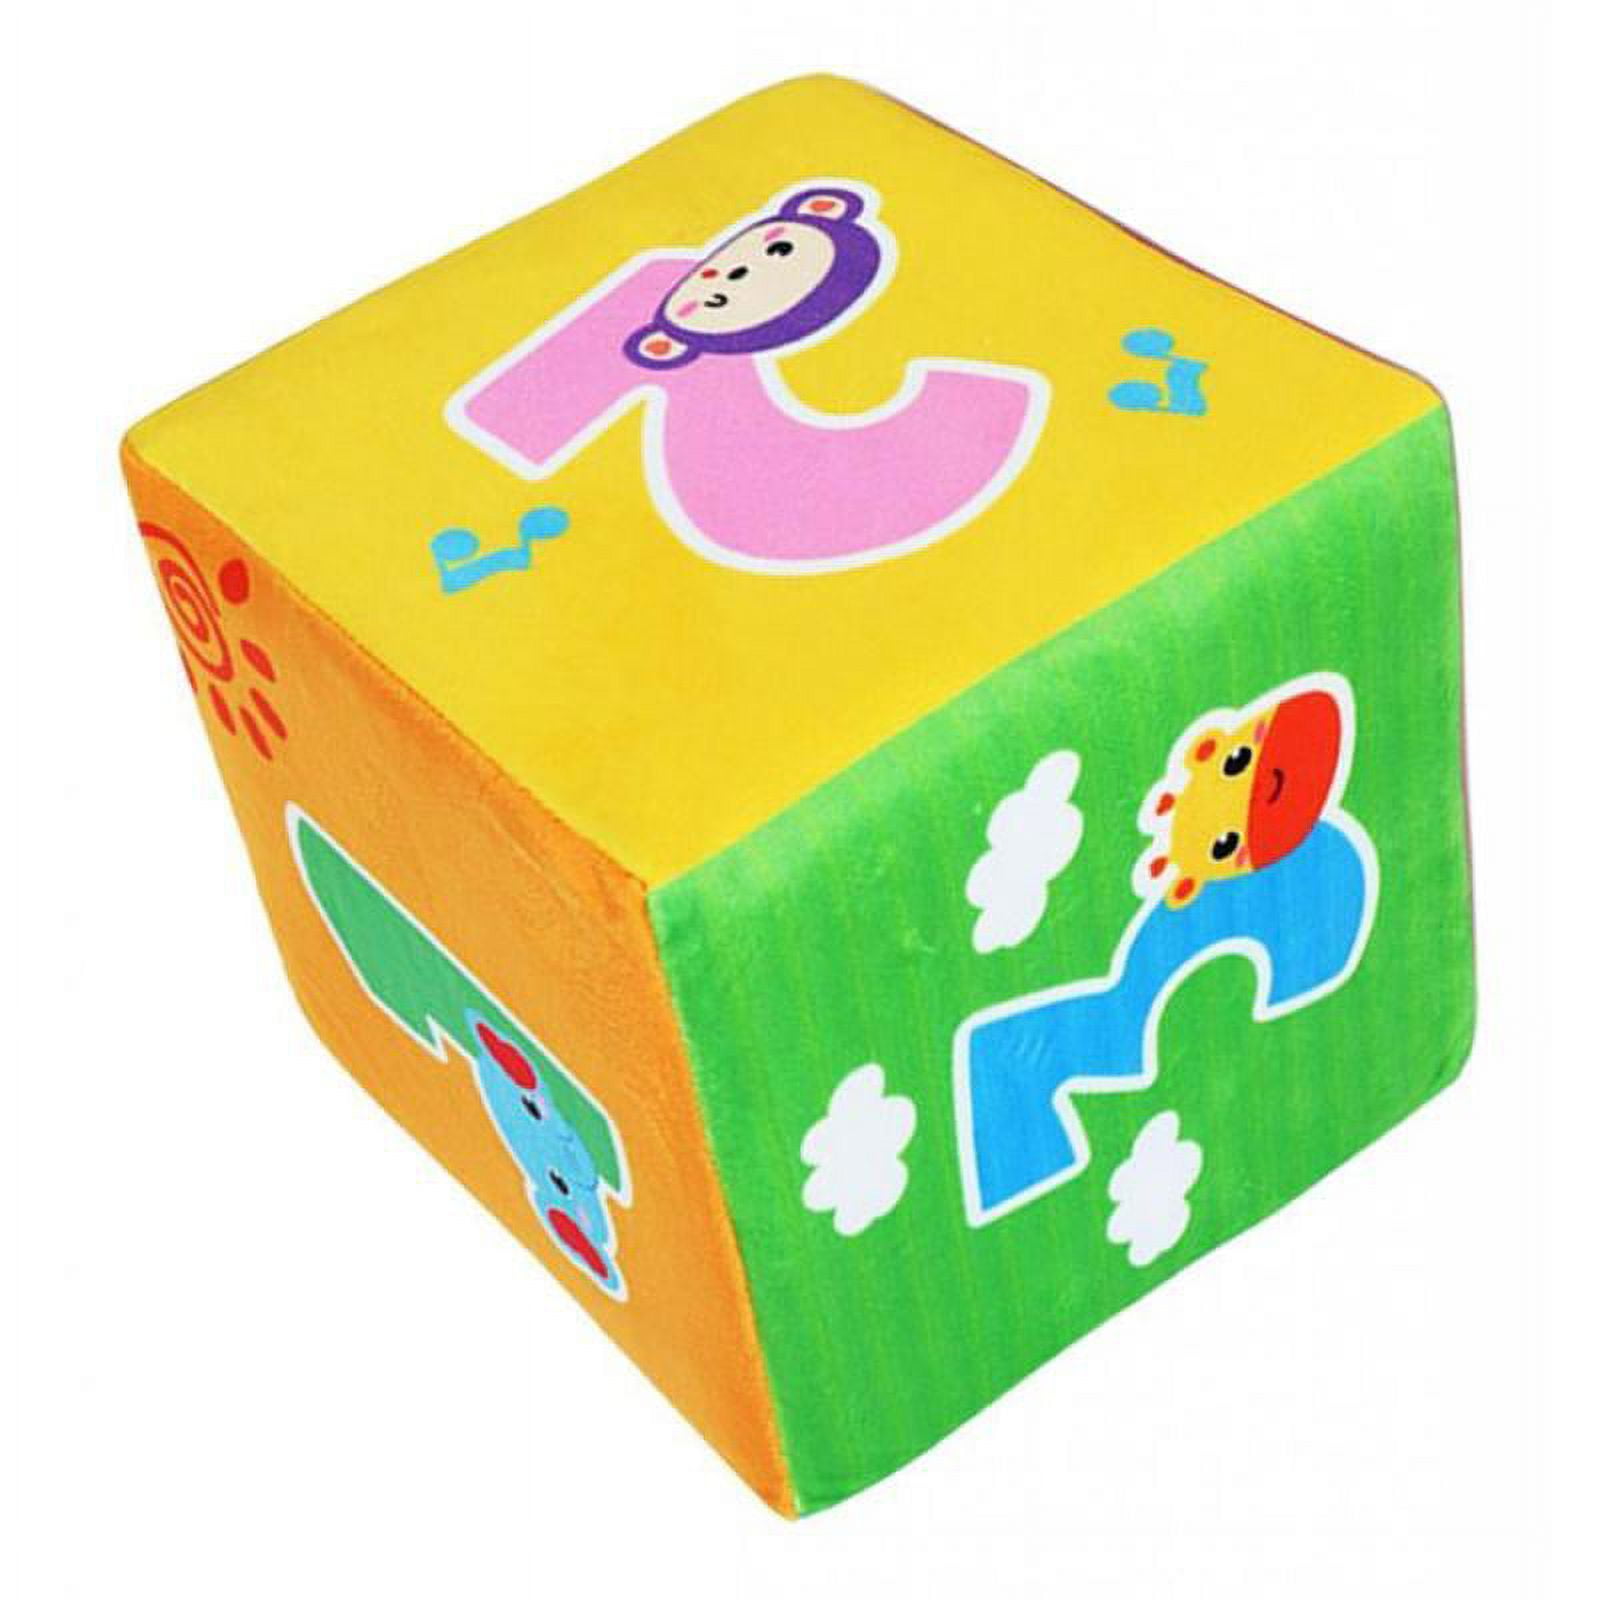 THE TWIDDLERS 48 Large Foam Dice Set, 1.5 Inch - Colorful